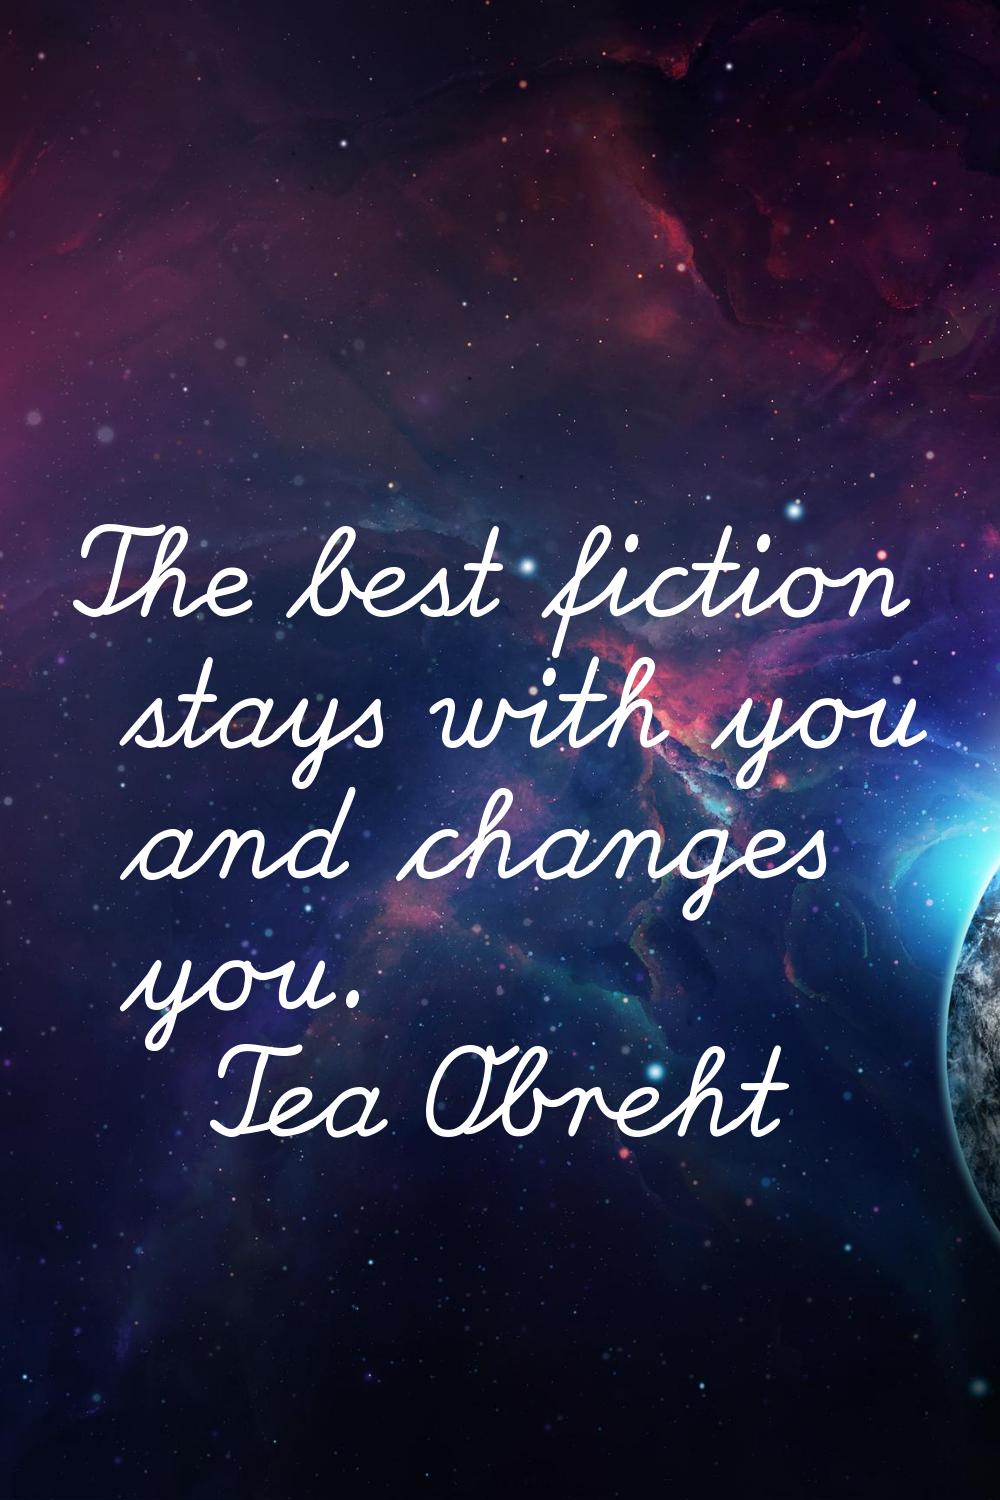 The best fiction stays with you and changes you.